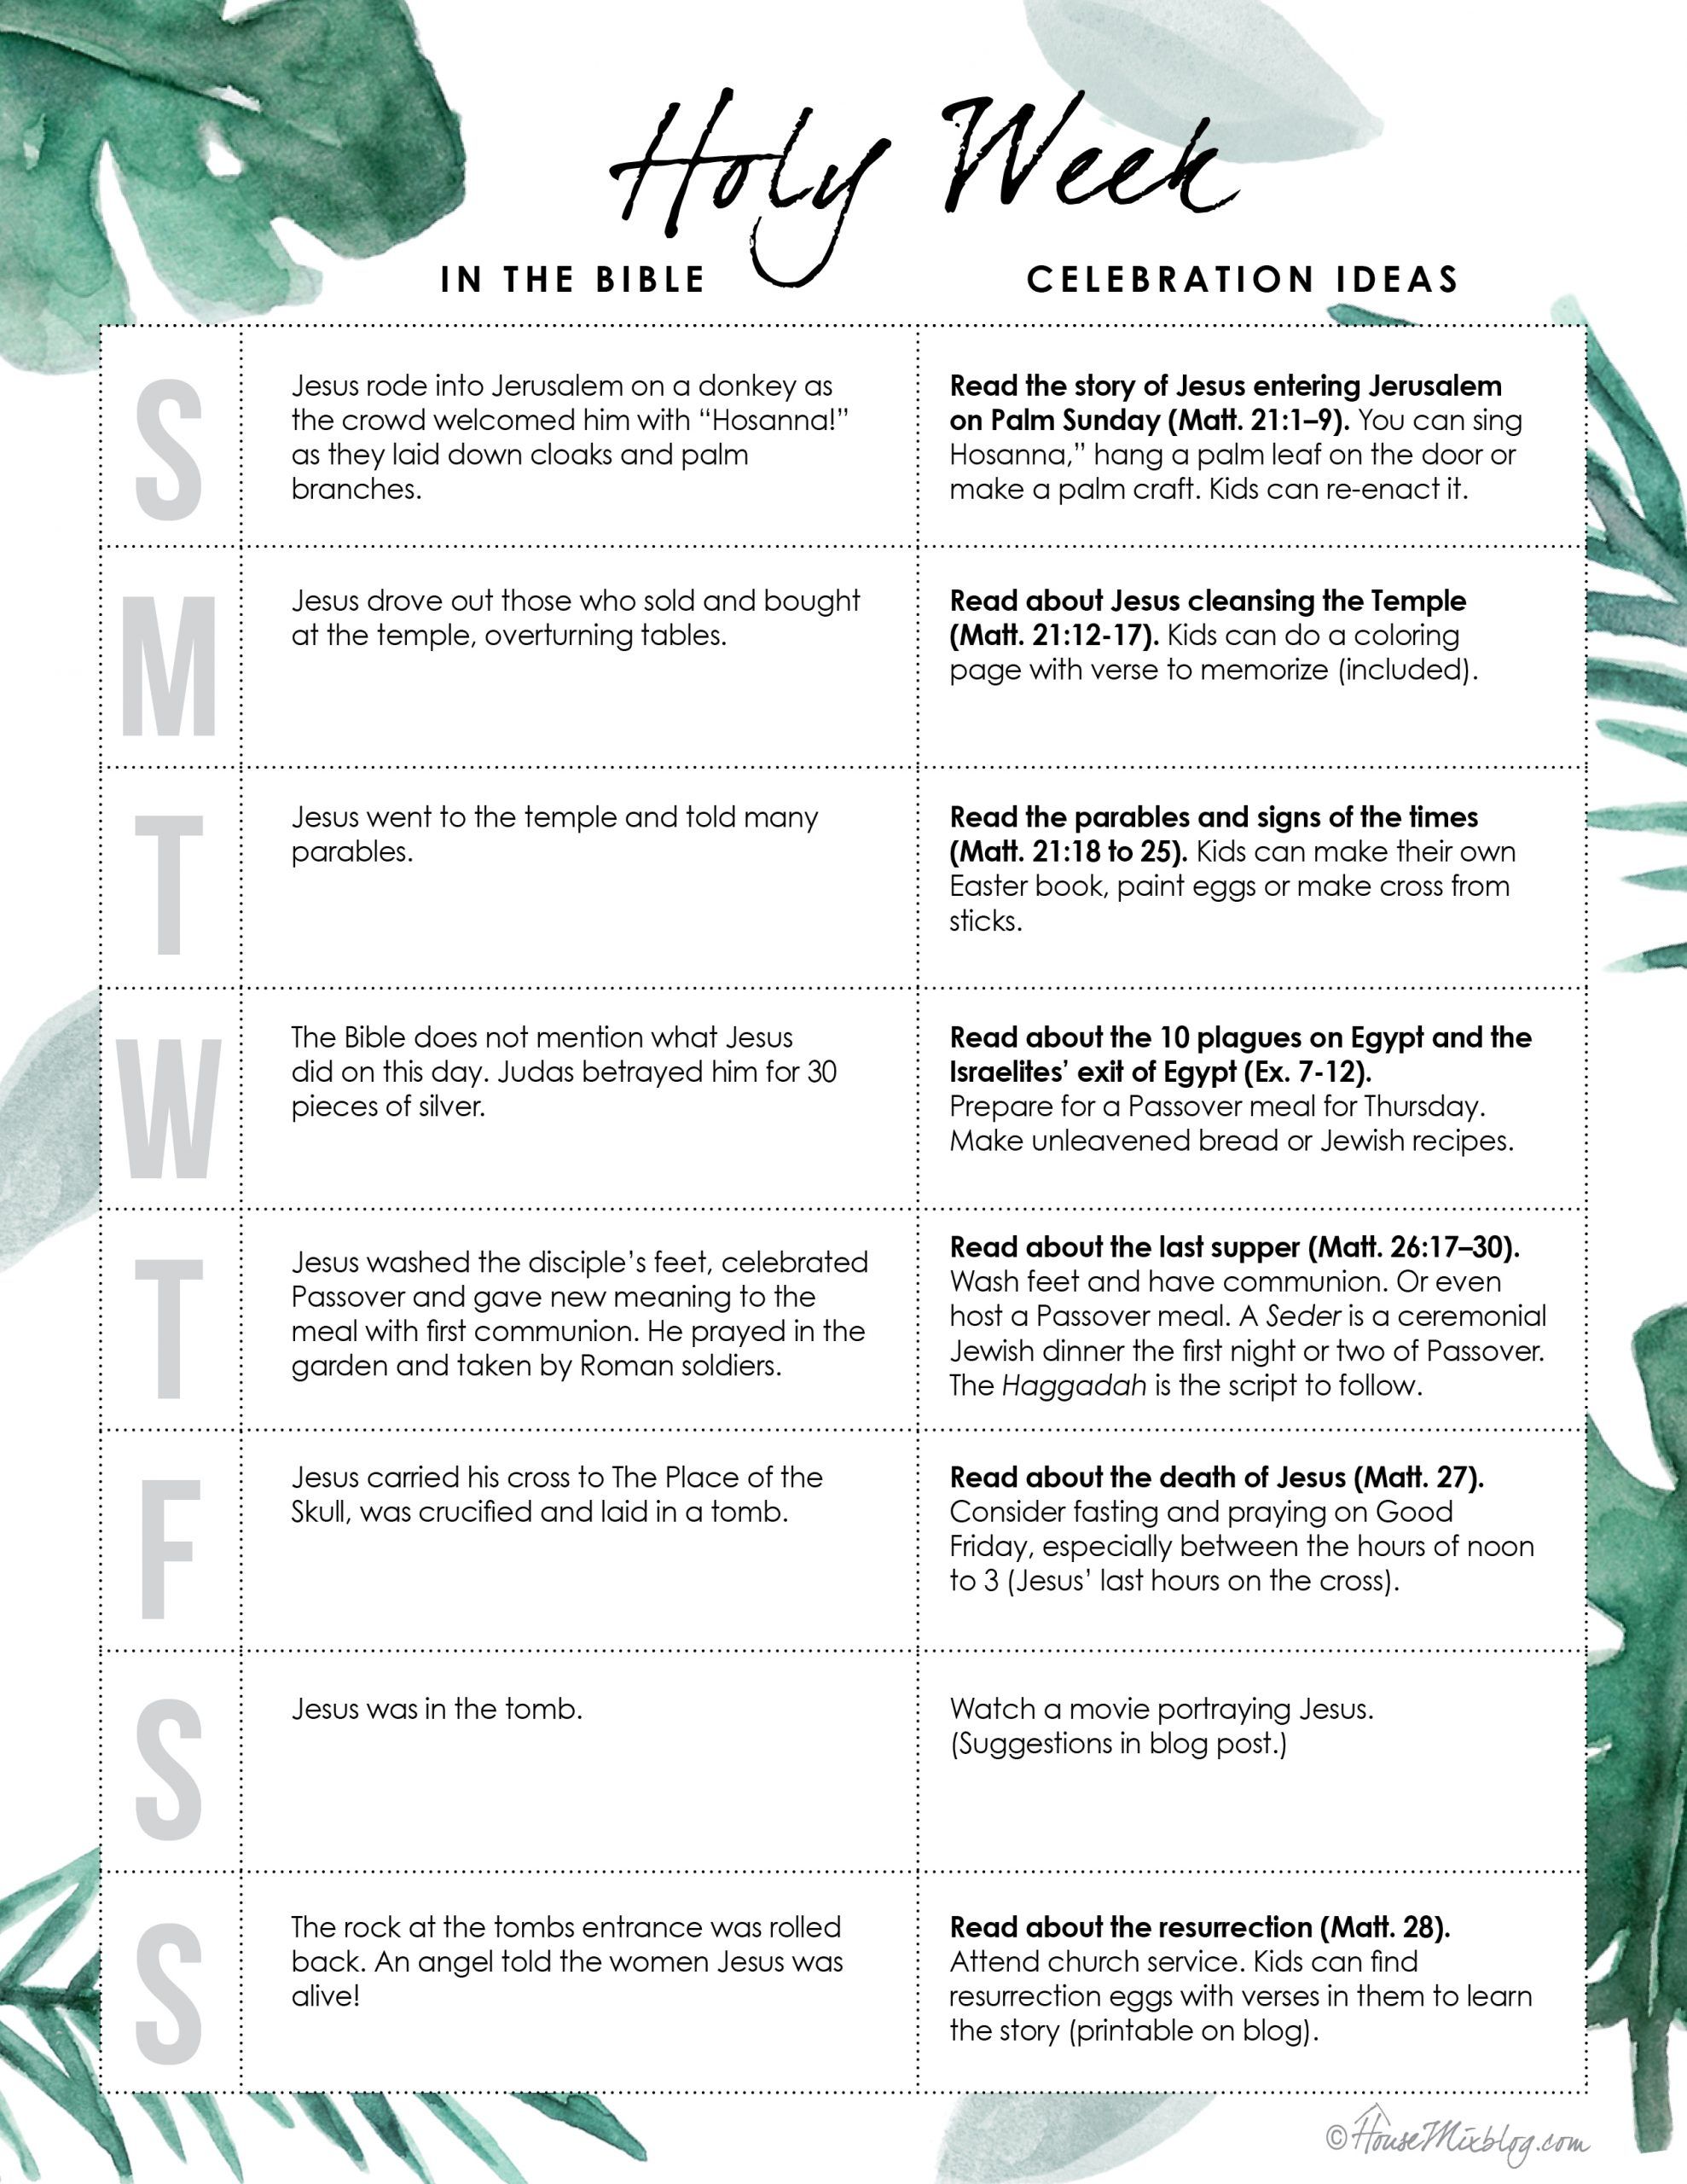 Holy Week activities for each day – printable